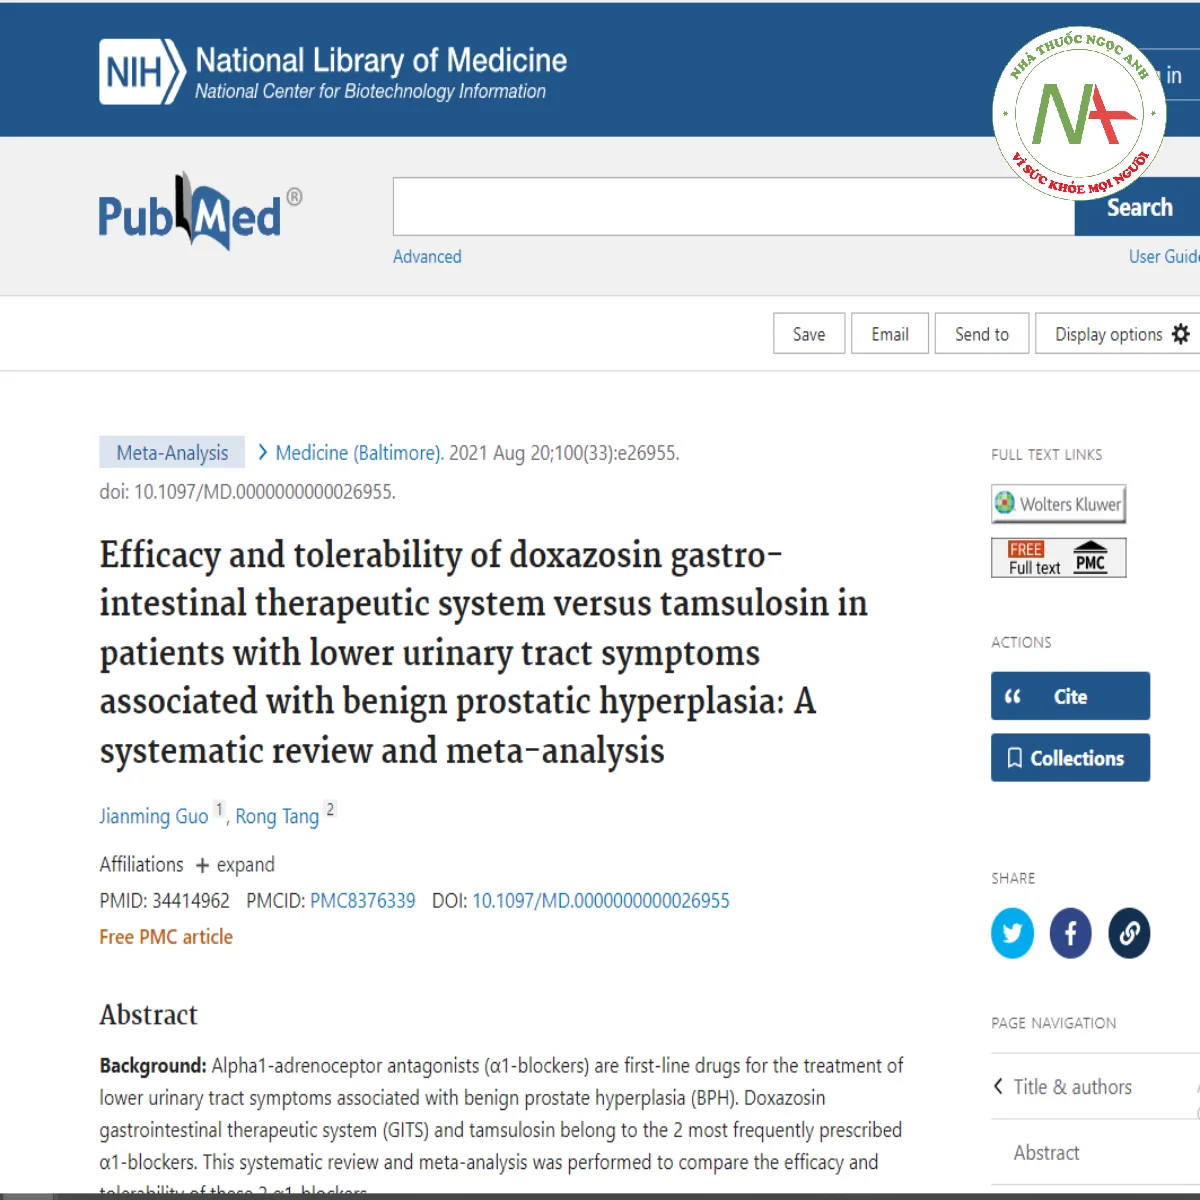 Efficacy and tolerability of doxazosin gastro-intestinal therapeutic system versus tamsulosin in patients with lower urinary tract symptoms associated with benign prostatic hyperplasia: A systematic review and meta-analysis